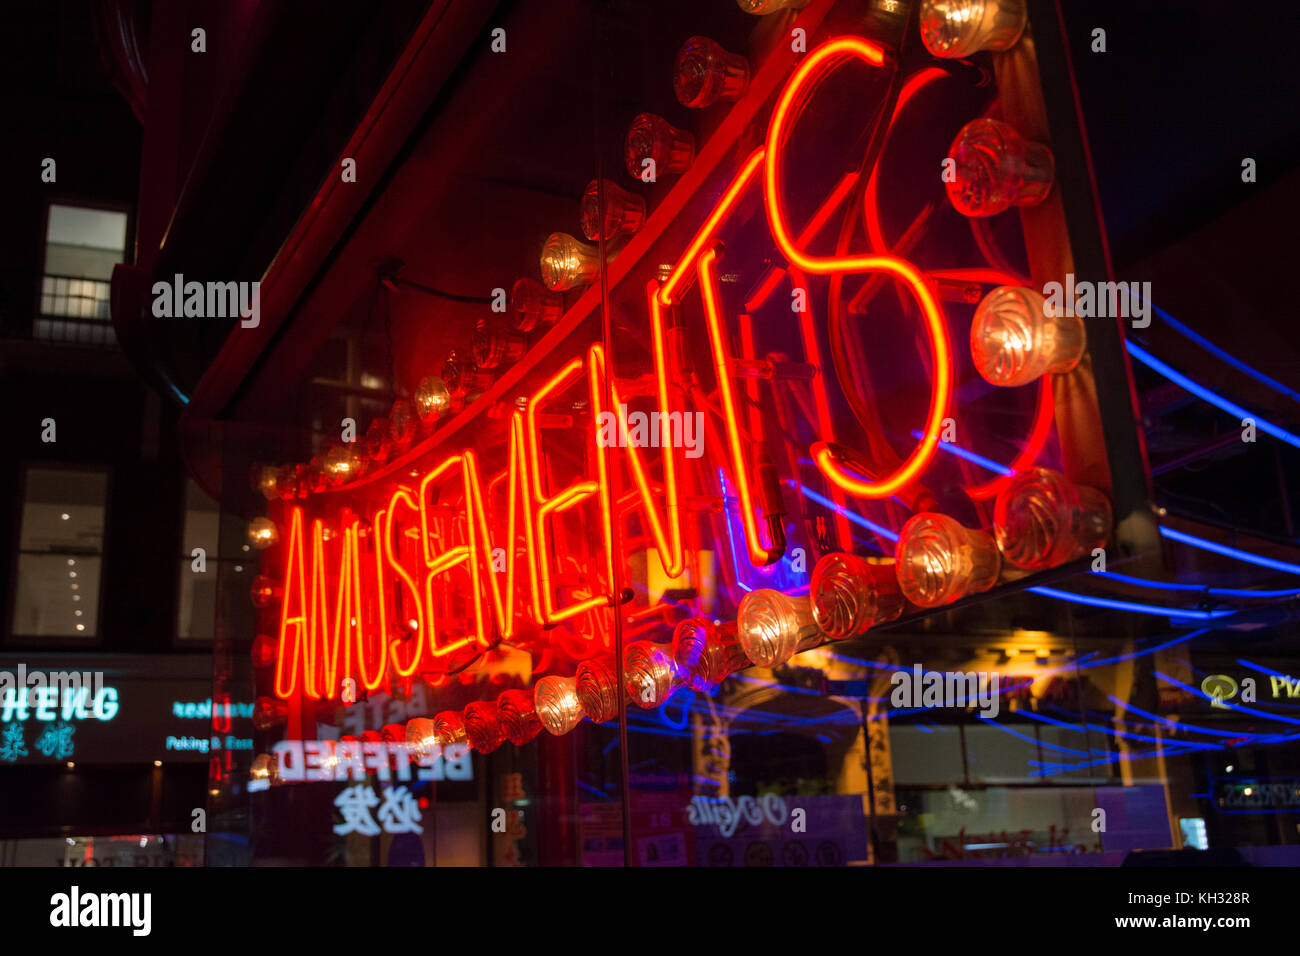 A neon sign outside an amusement arcade in Chinatown in London's West End, UK Stock Photo